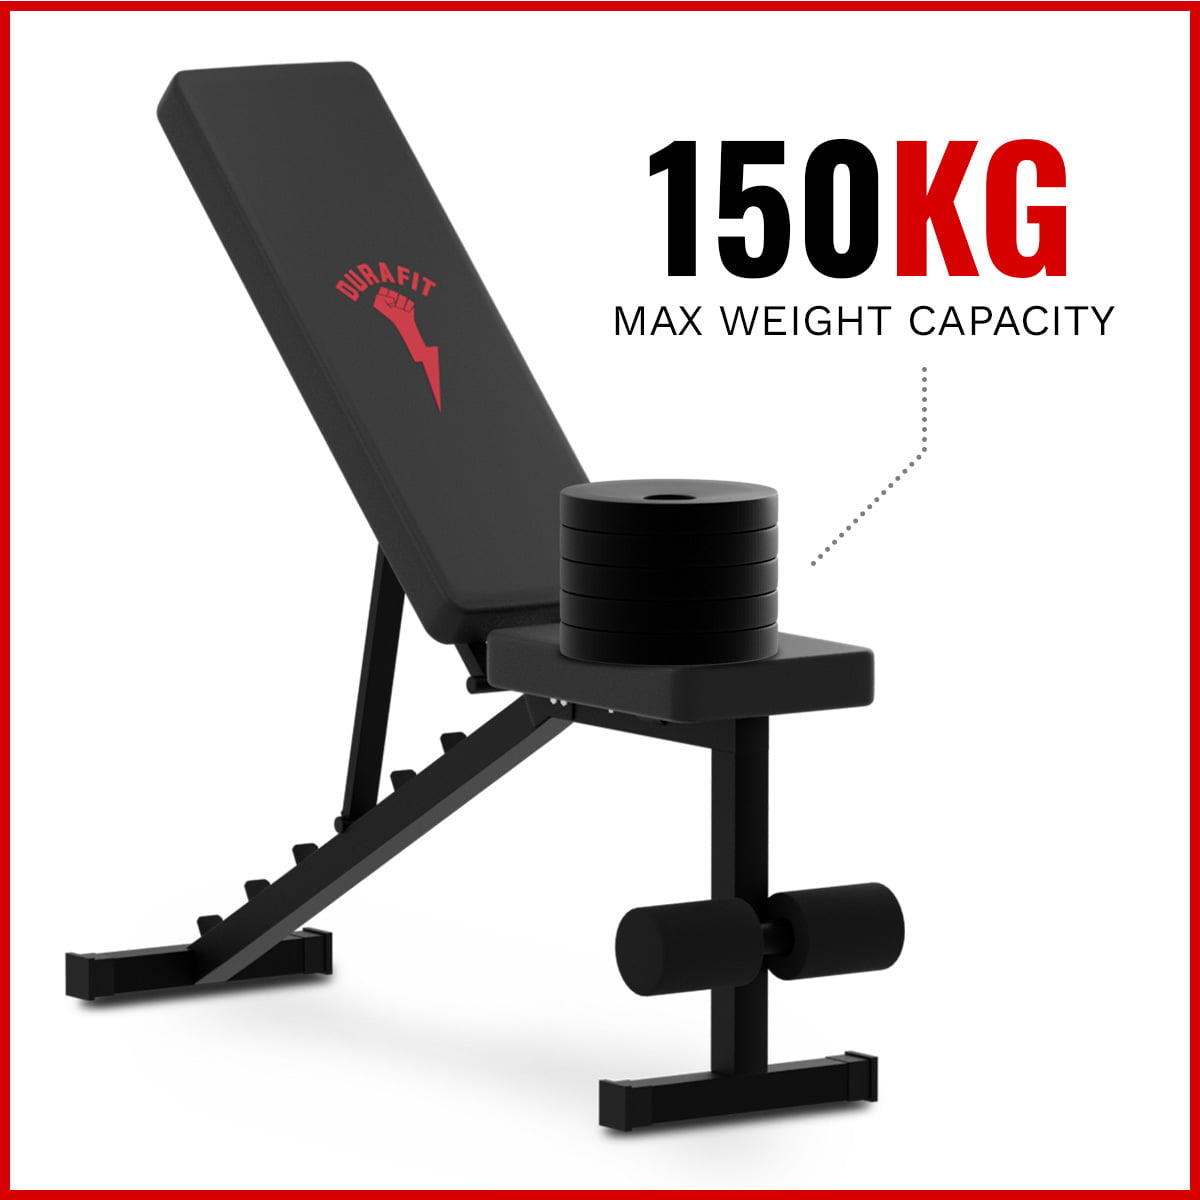 Durafit Foldable Bench FB01 With User Weight 150kg